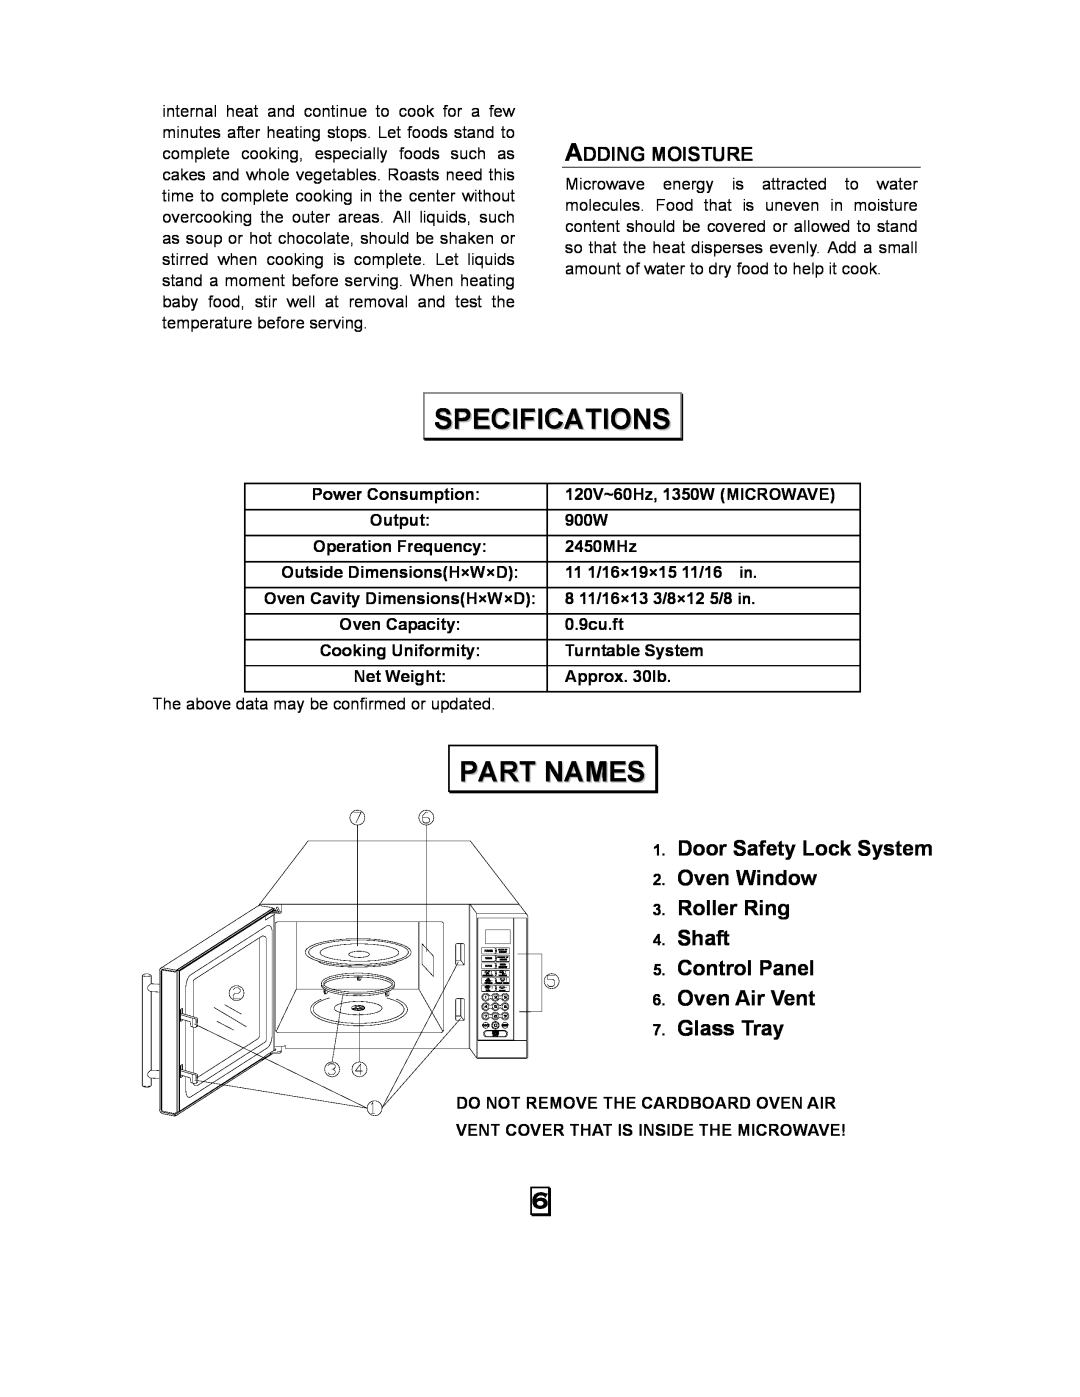 RCA RMW968 manual Specifications, Part Names, Adding Moisture, Oven Air Vent Glass Tray 